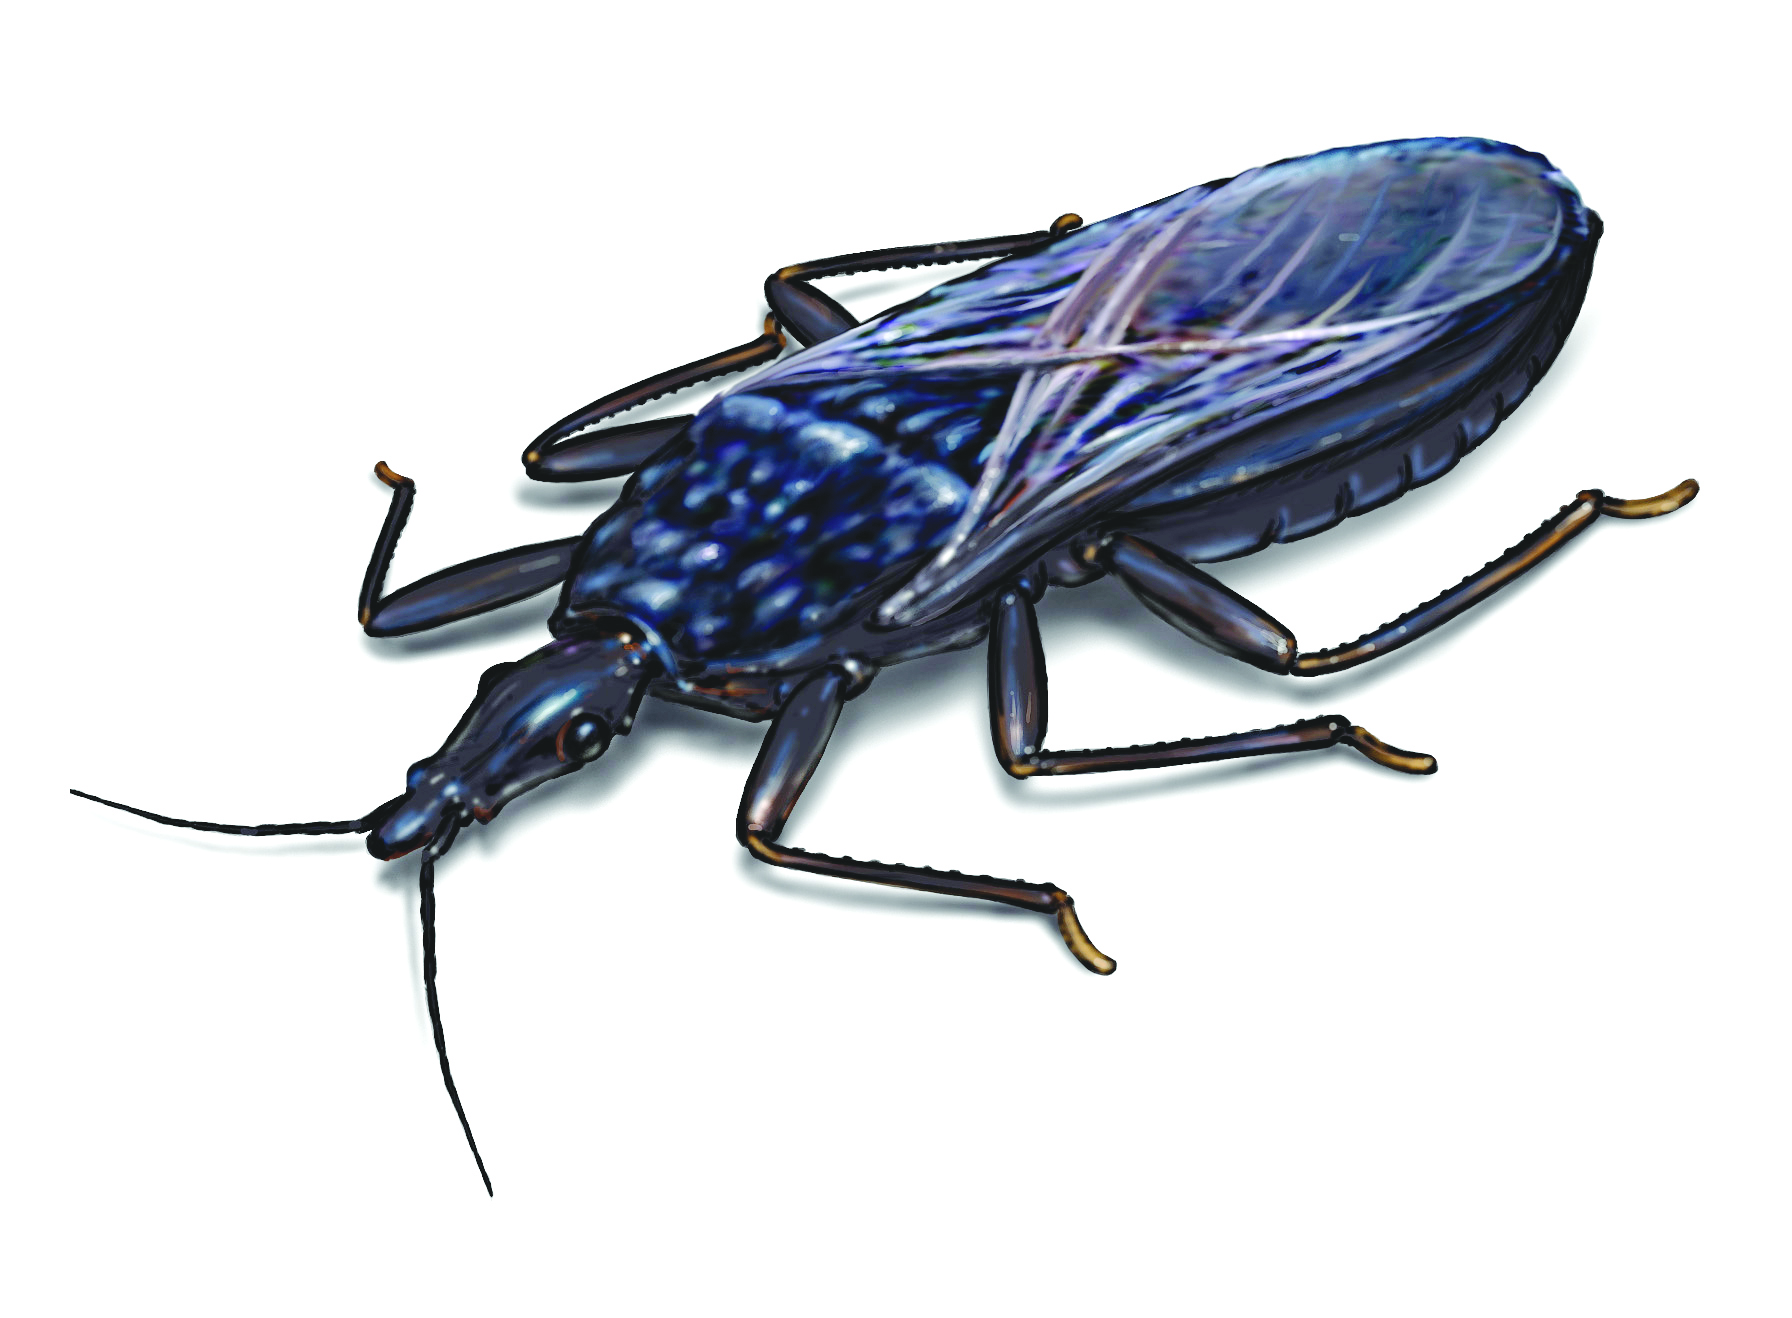 How can you identify common household bugs and insects?